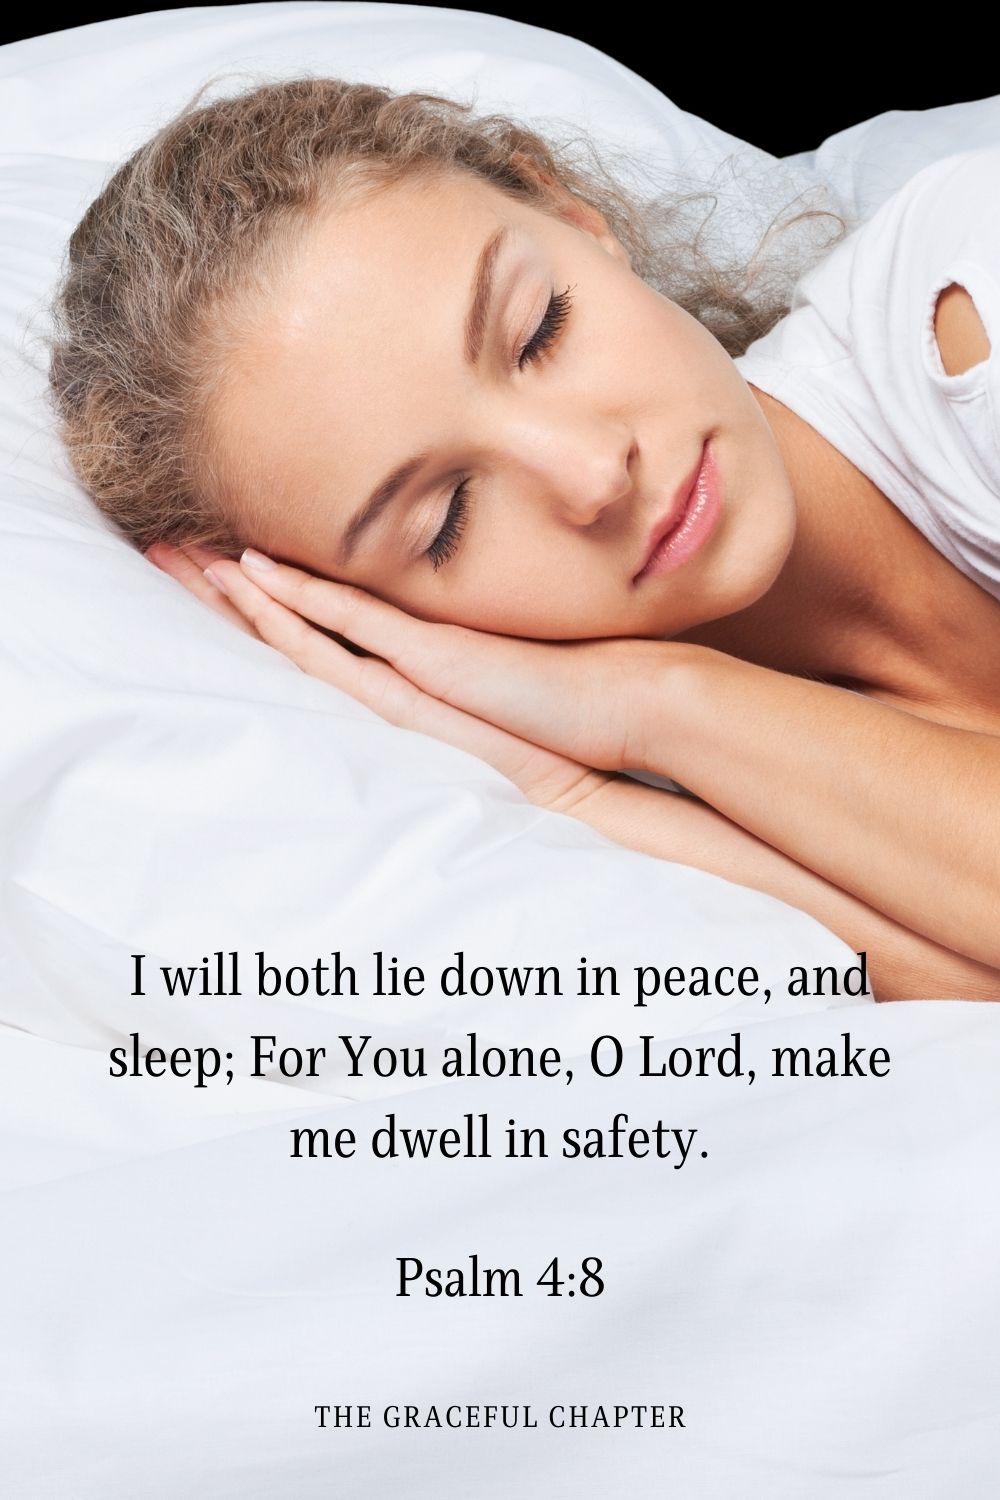 I will both lie down in peace, and sleep; For You alone, O Lord, make me dwell in safety.